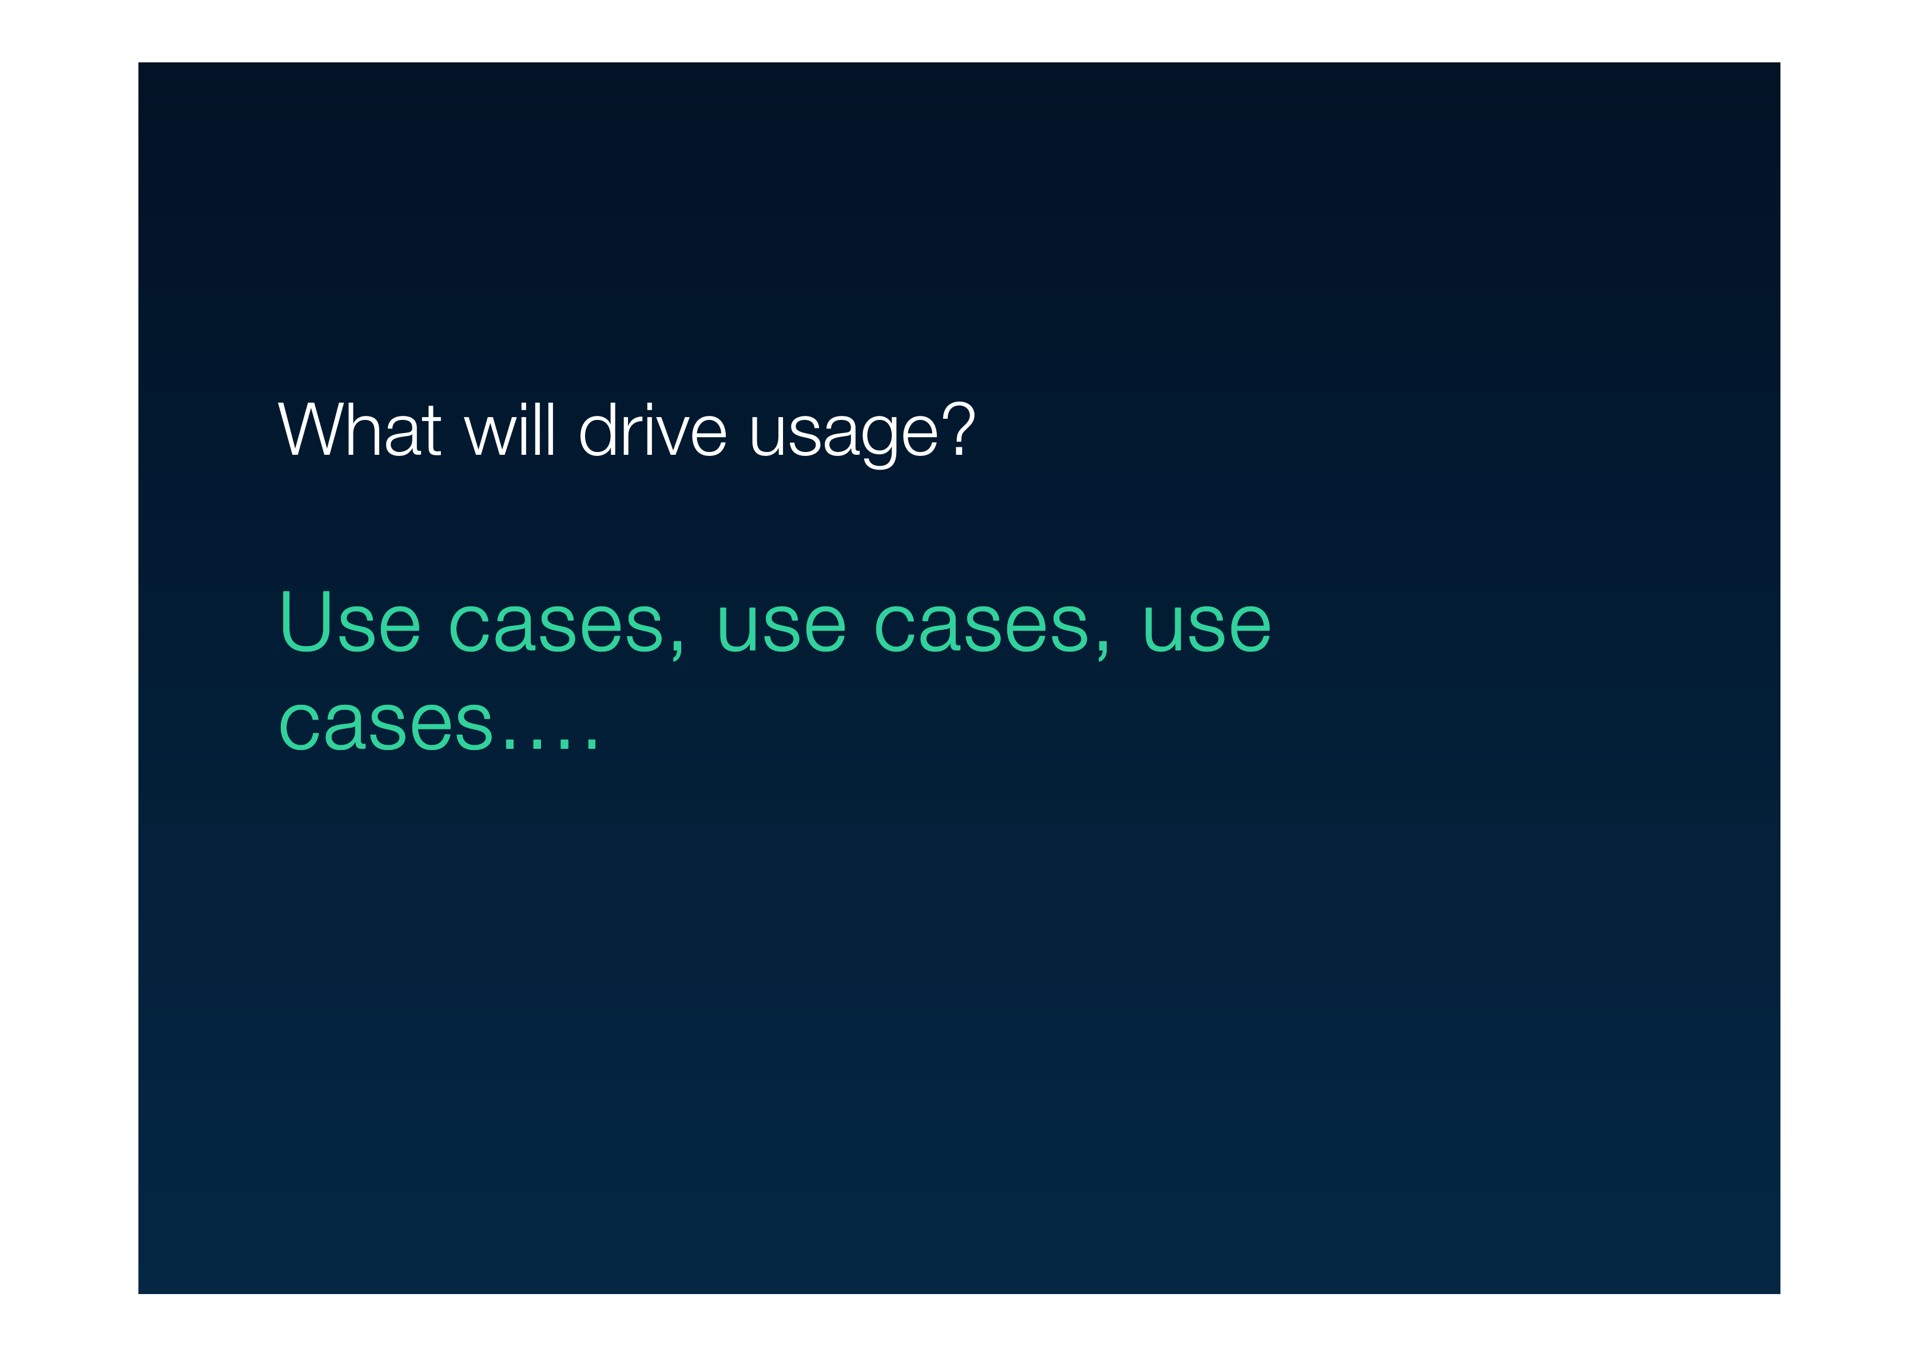 what will drive usage use cases use cases use use cases use cases use use cases use cases use use cases use cases use cases cases cases cases | Wirecard